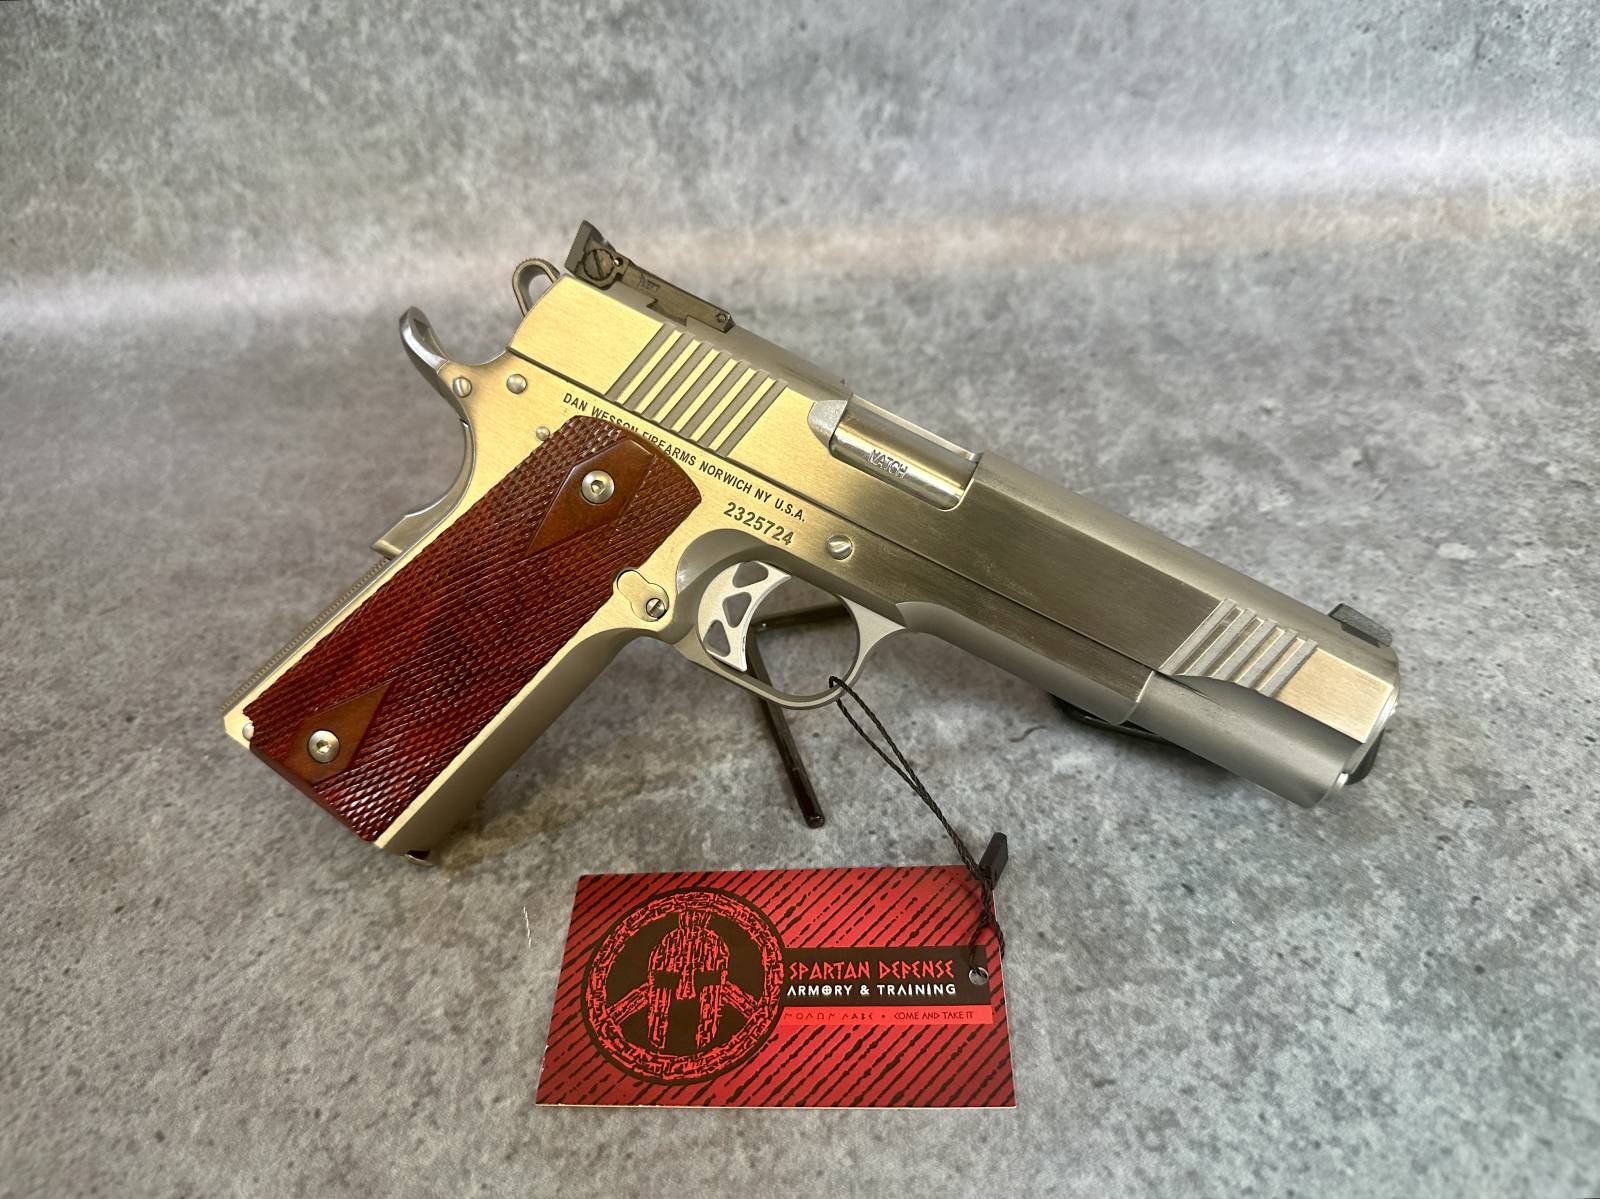 Dan Wesson Pointman Seven, Stainless Steel Frame, 45 ACP 8+1 5", 01900-img-0